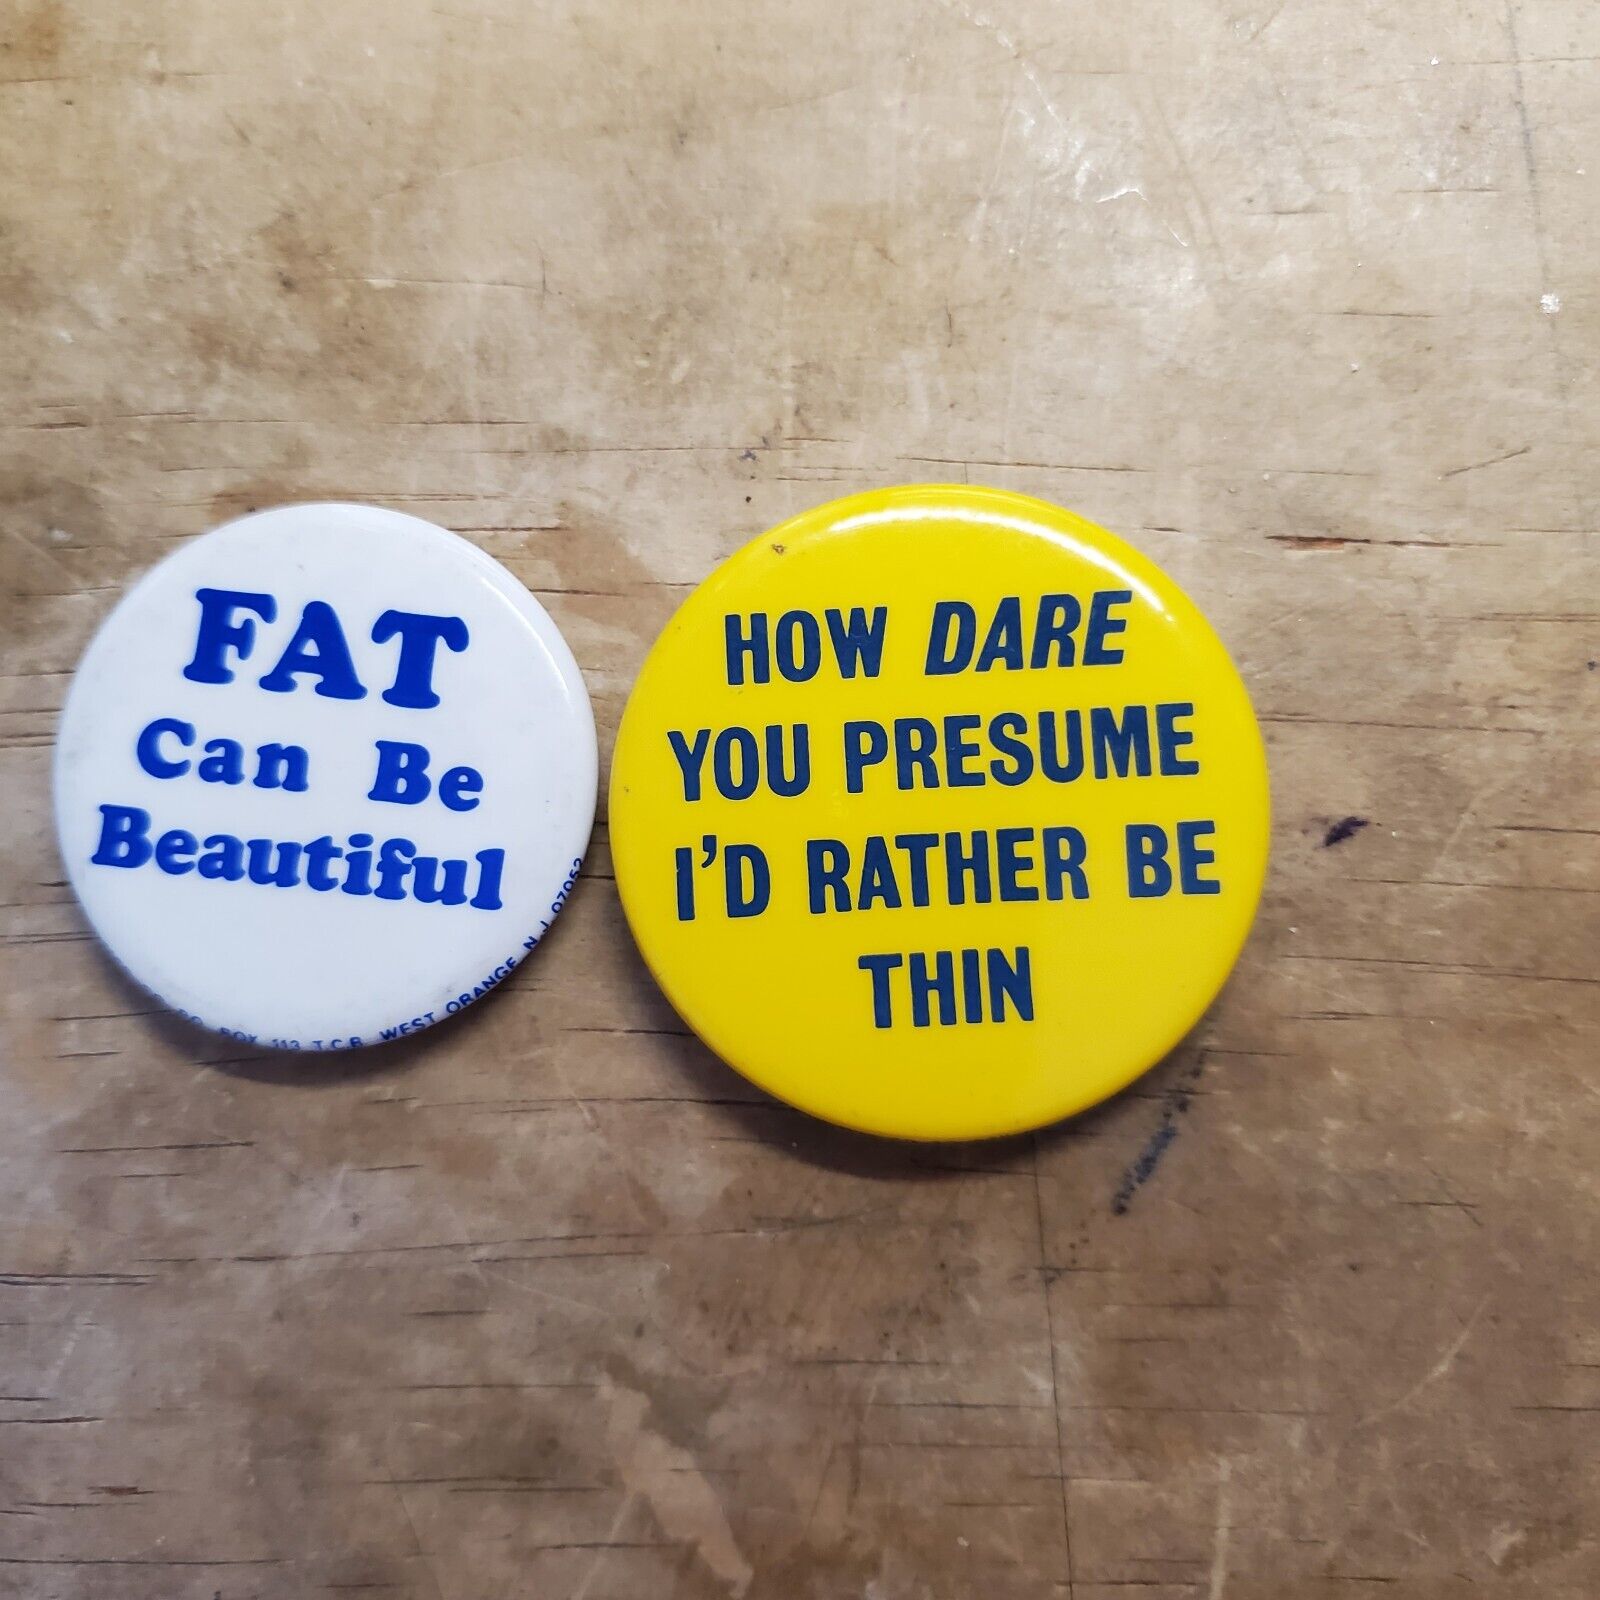 Vintage 70\'s 1978 Fat Can Be Beautiful And How Dare You Presume..Protest Buttons